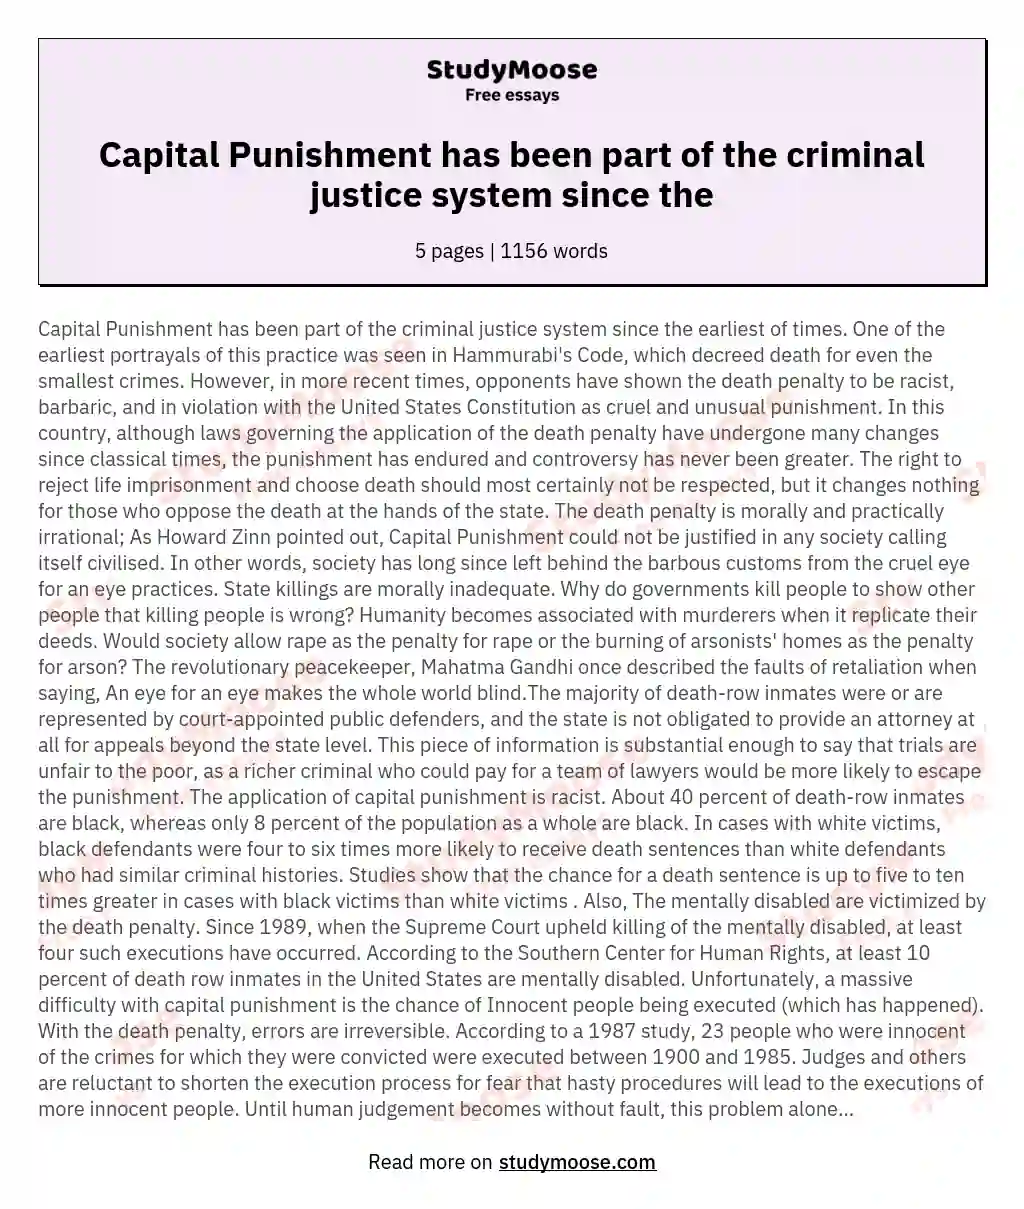 Capital Punishment has been part of the criminal justice system since the